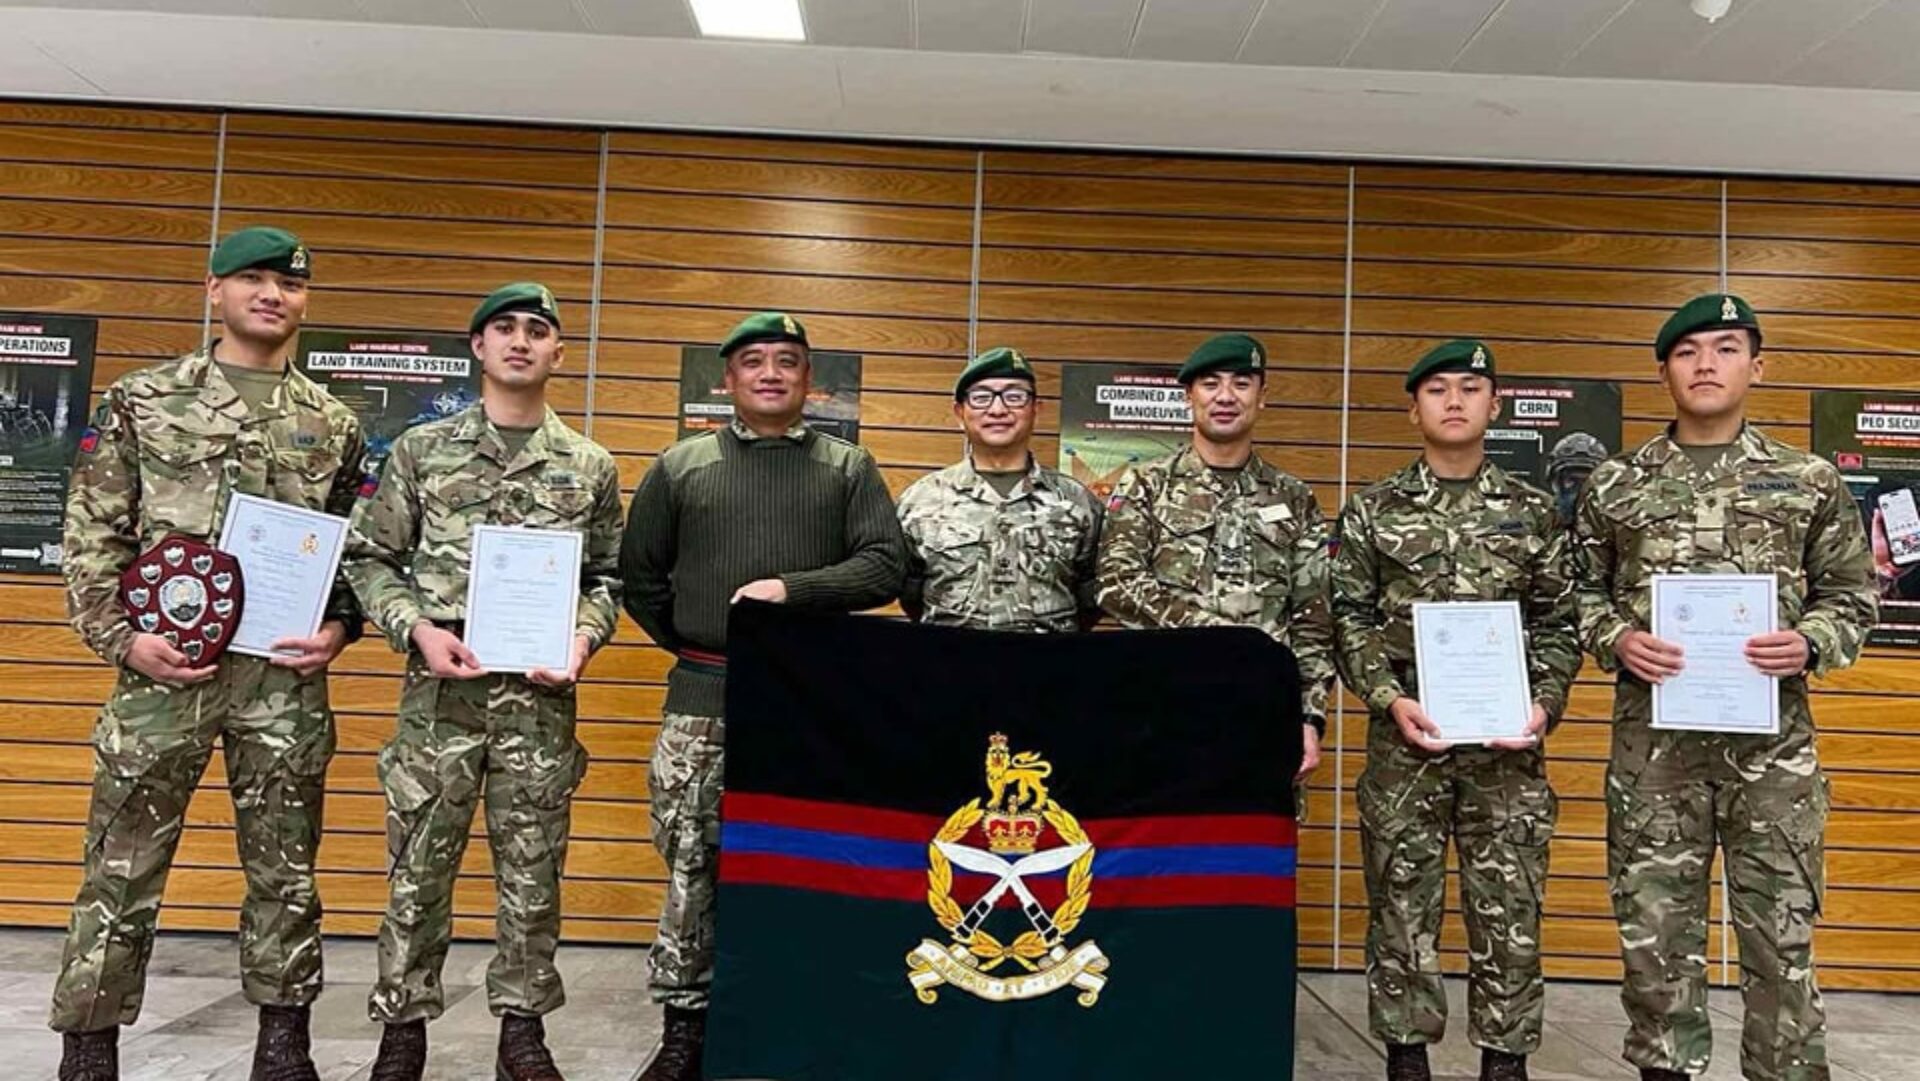 Four new Gurkhas from Gurkha Staff and Personnel Support (GSPS) trainees from Intake 23 have successfully graduated Service Initial Personnel Administration Course (SIPAC)